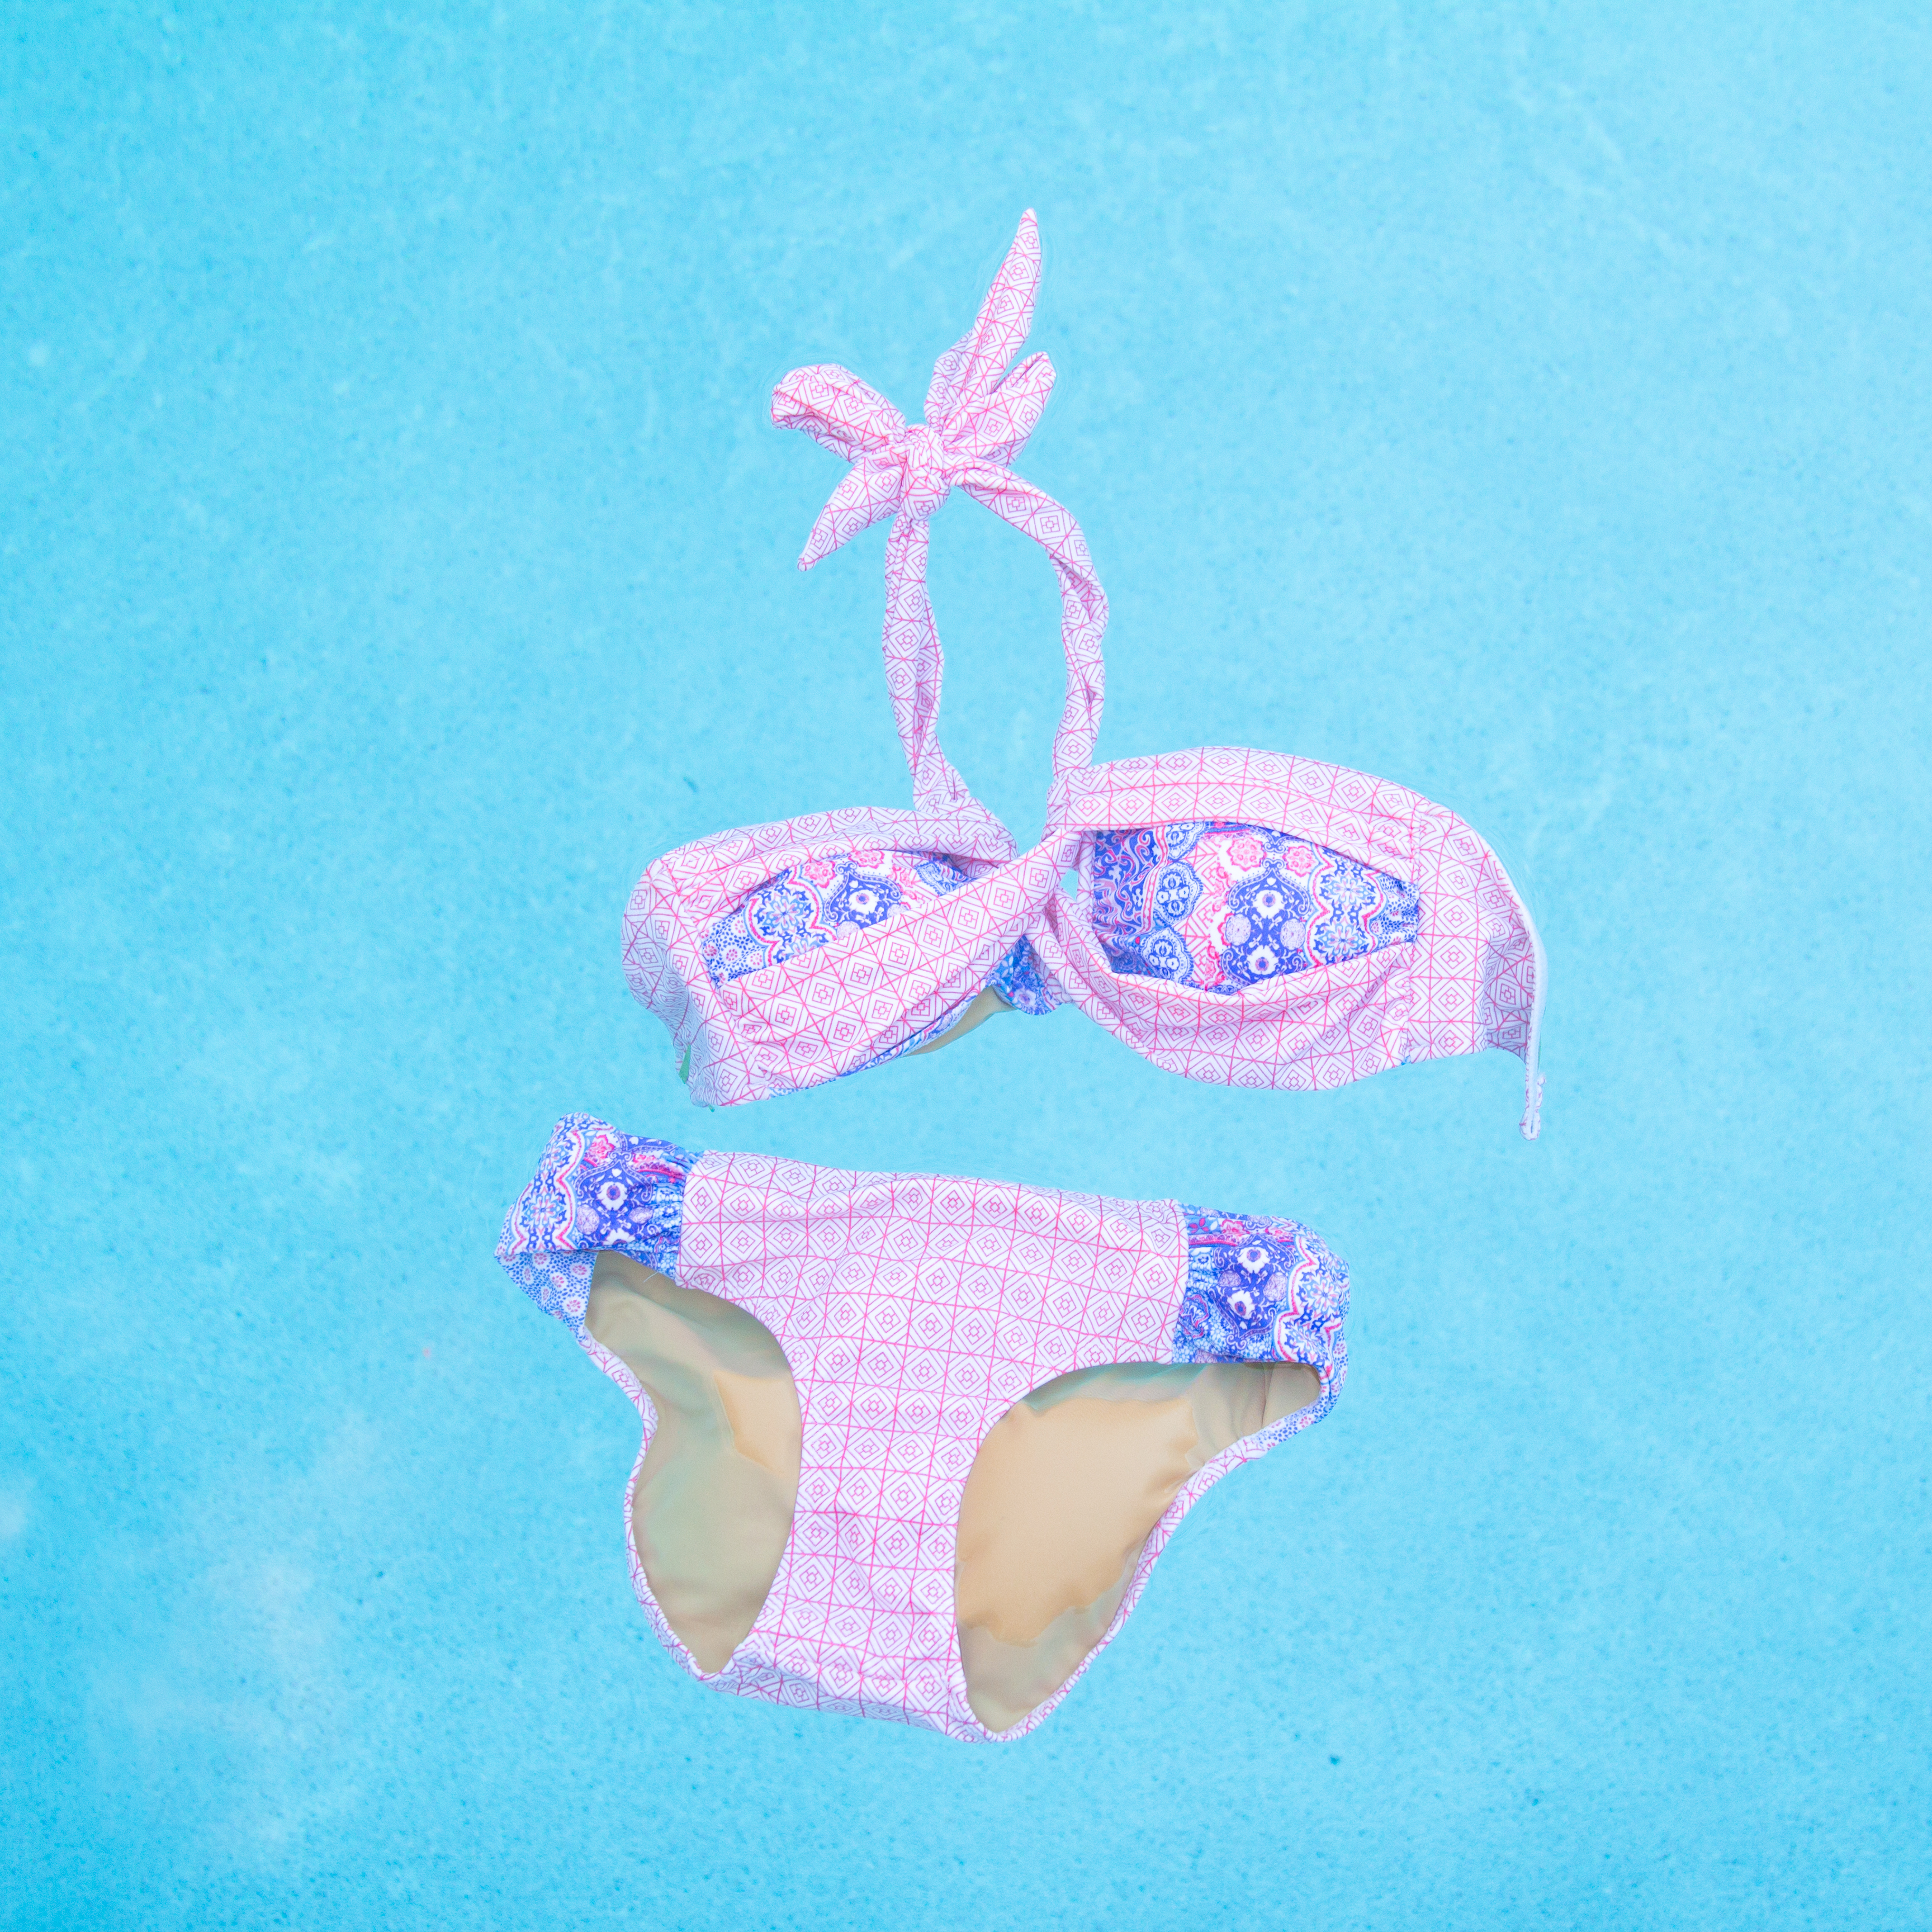 SWIMWEAR THAT PROTECTS WITH SPF